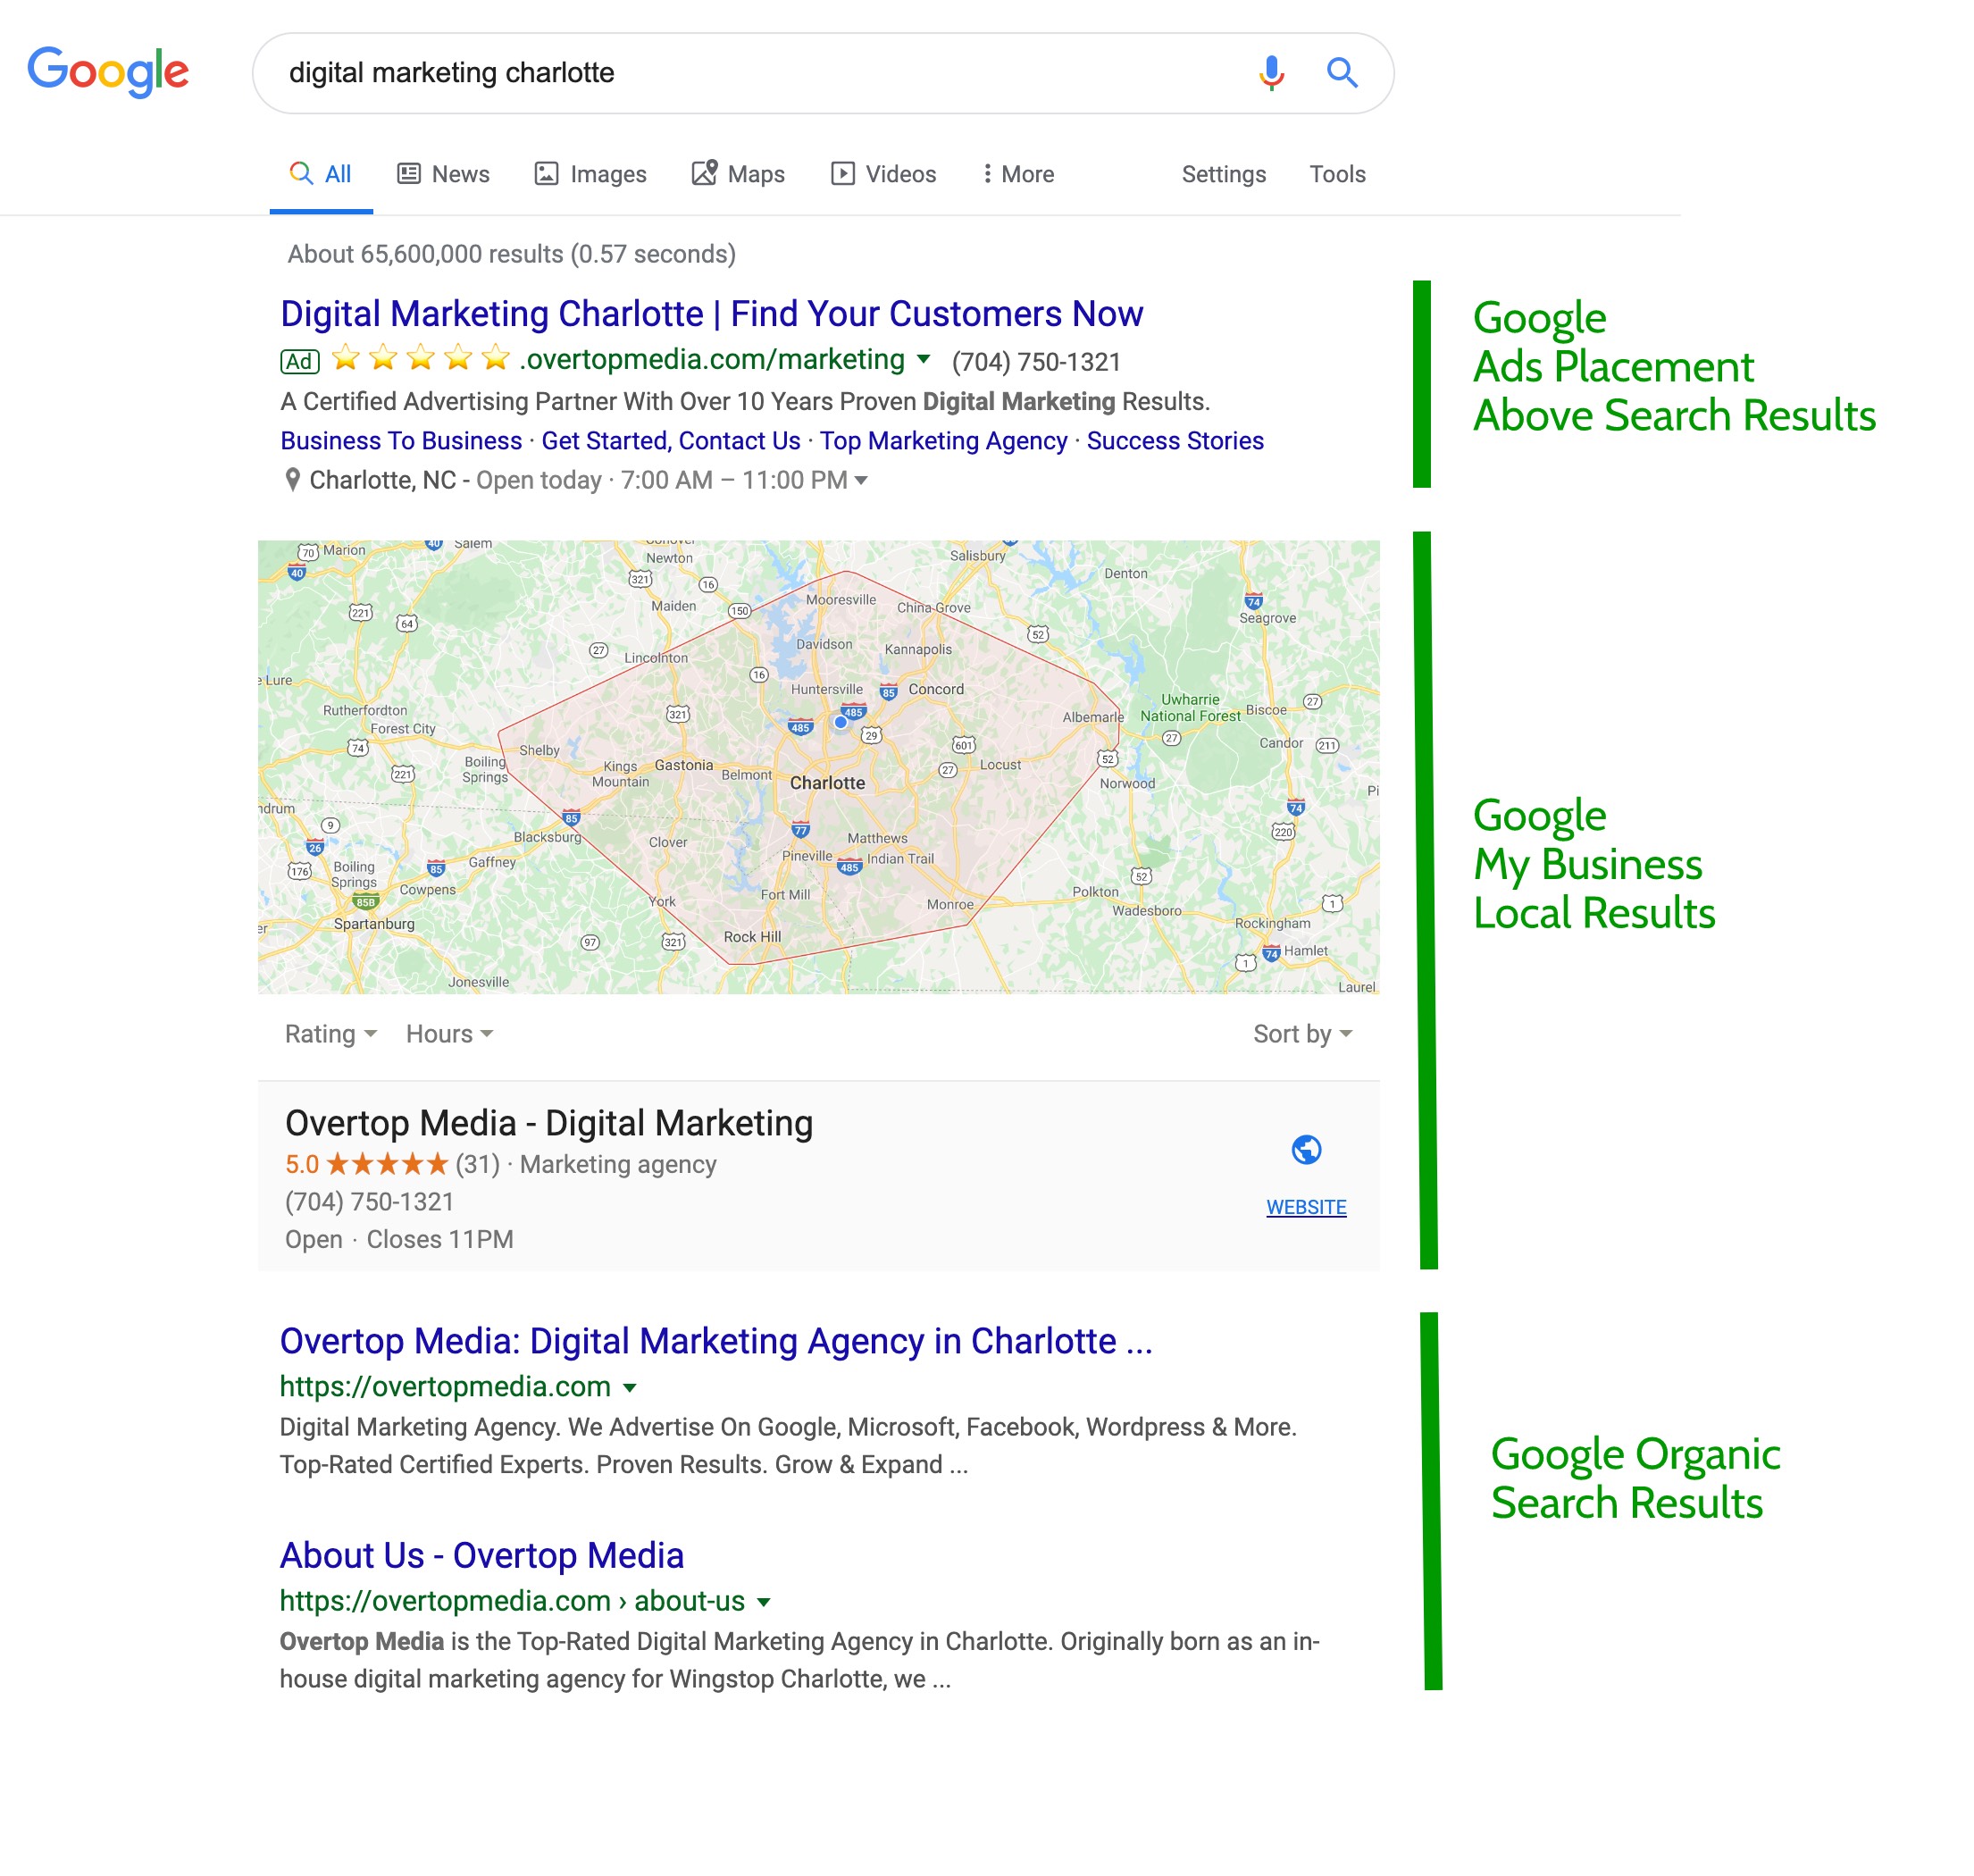 Google Ads Online Advertising Search Results